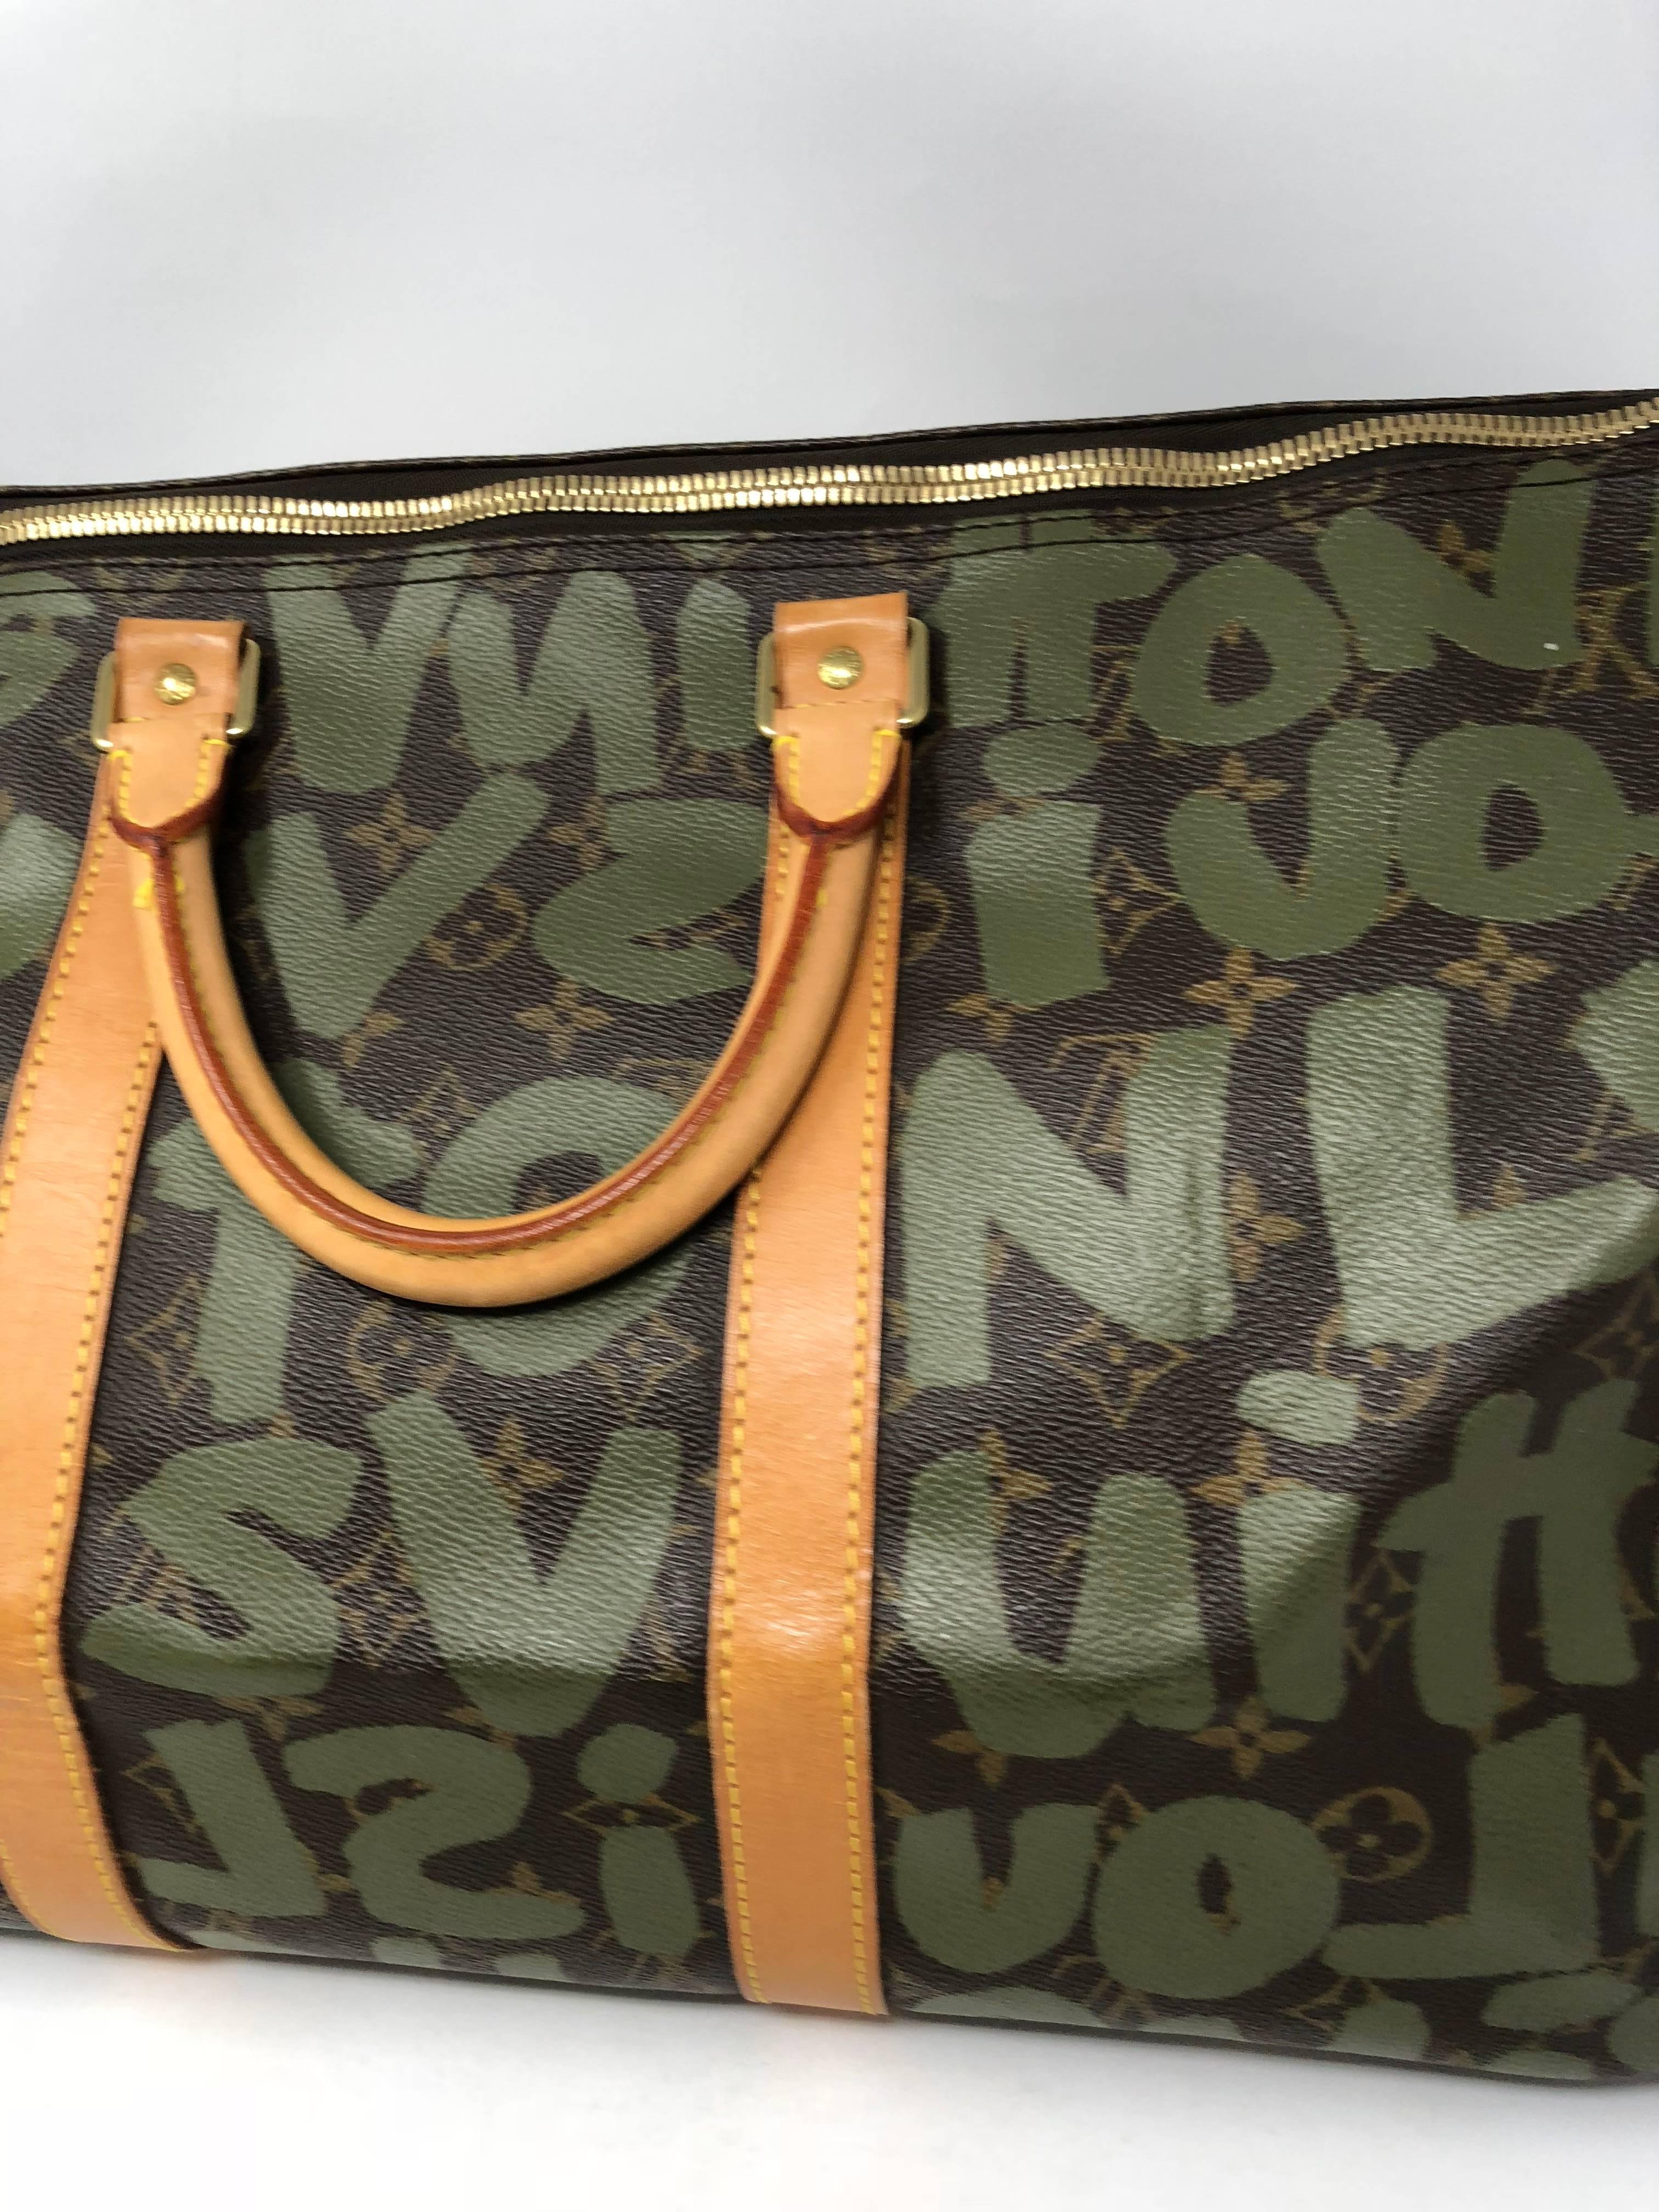 Louis Vuitton Limited Edition Khaki Graffiti keepall 50 by Stephen Sprouse. Highly collected and adored Stephen Sprouse was the artist behind these pieces for LV. Great carry on size. Good condition with golden patina on the leather and handles.